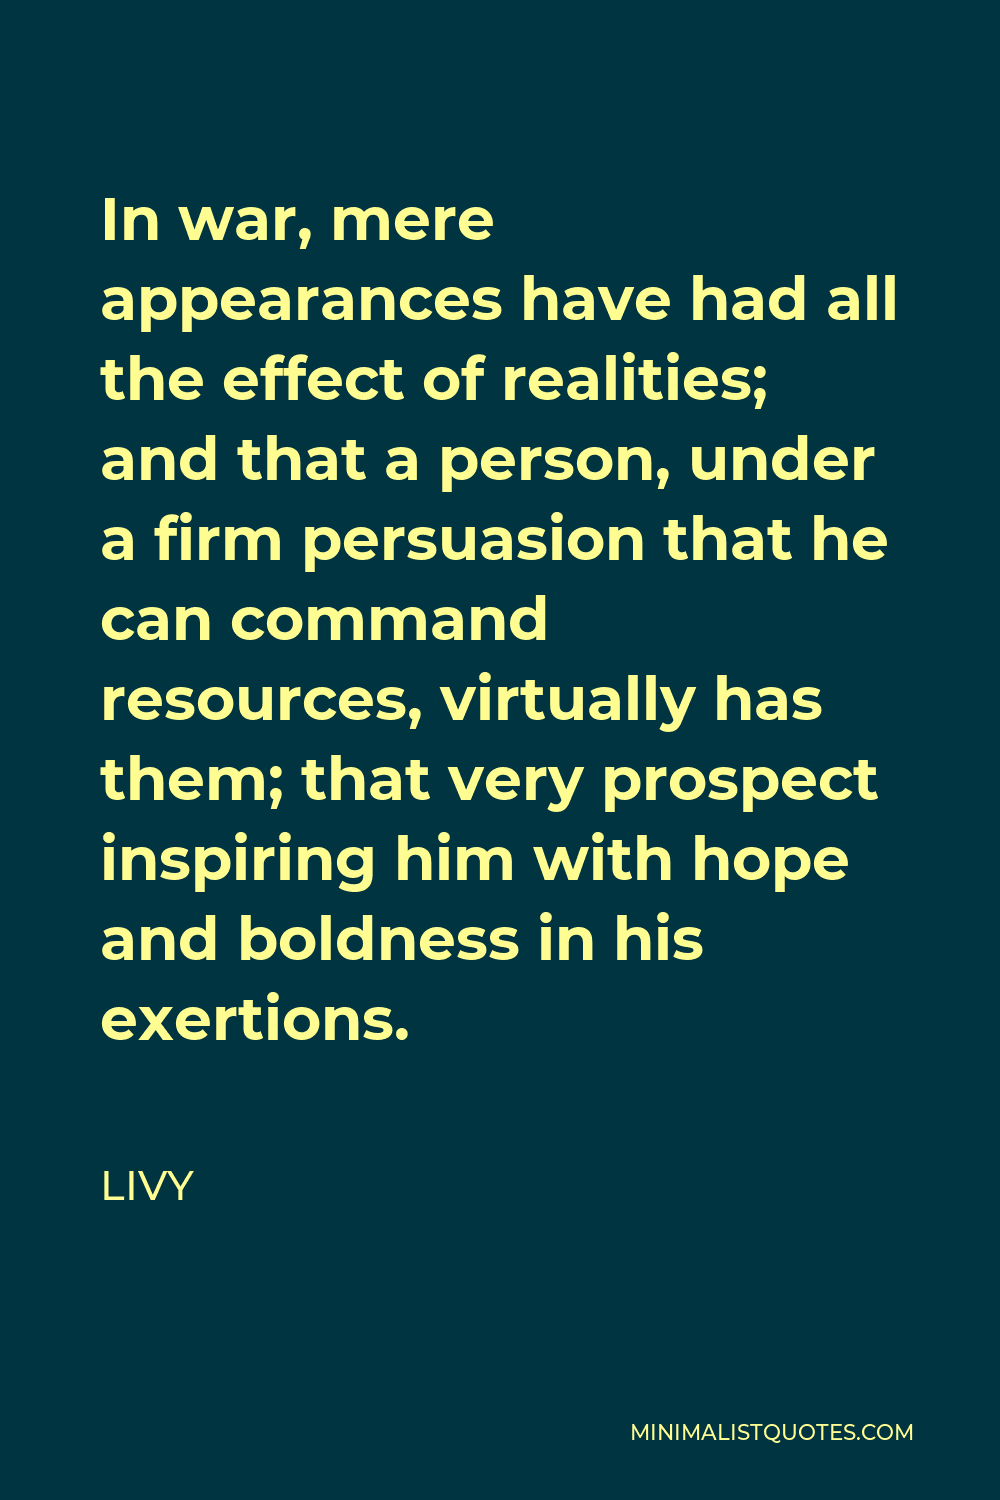 Livy Quote - In war, mere appearances have had all the effect of realities; and that a person, under a firm persuasion that he can command resources, virtually has them; that very prospect inspiring him with hope and boldness in his exertions.